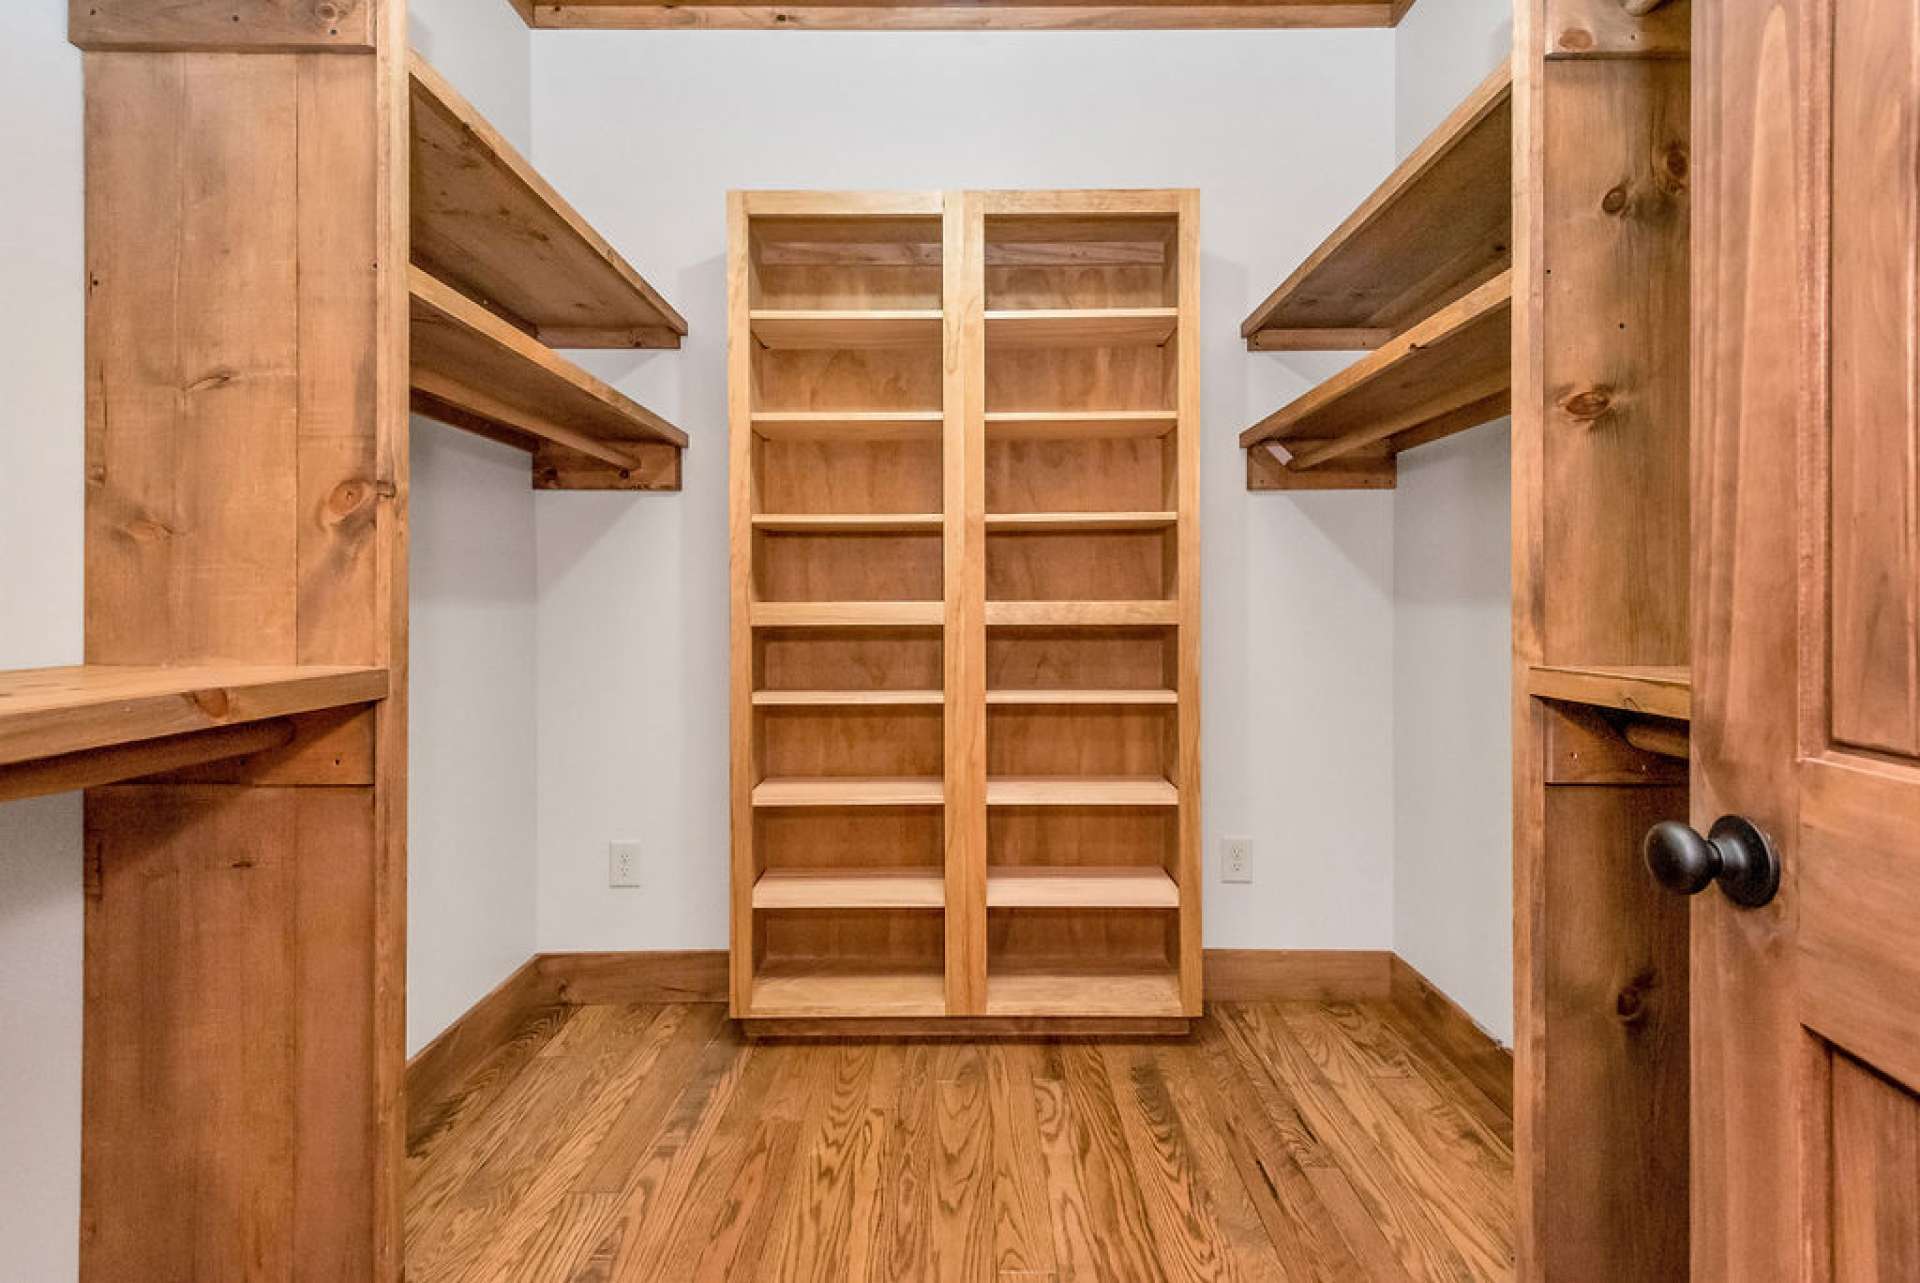 Sizeable closet with well-designed closet system in place.